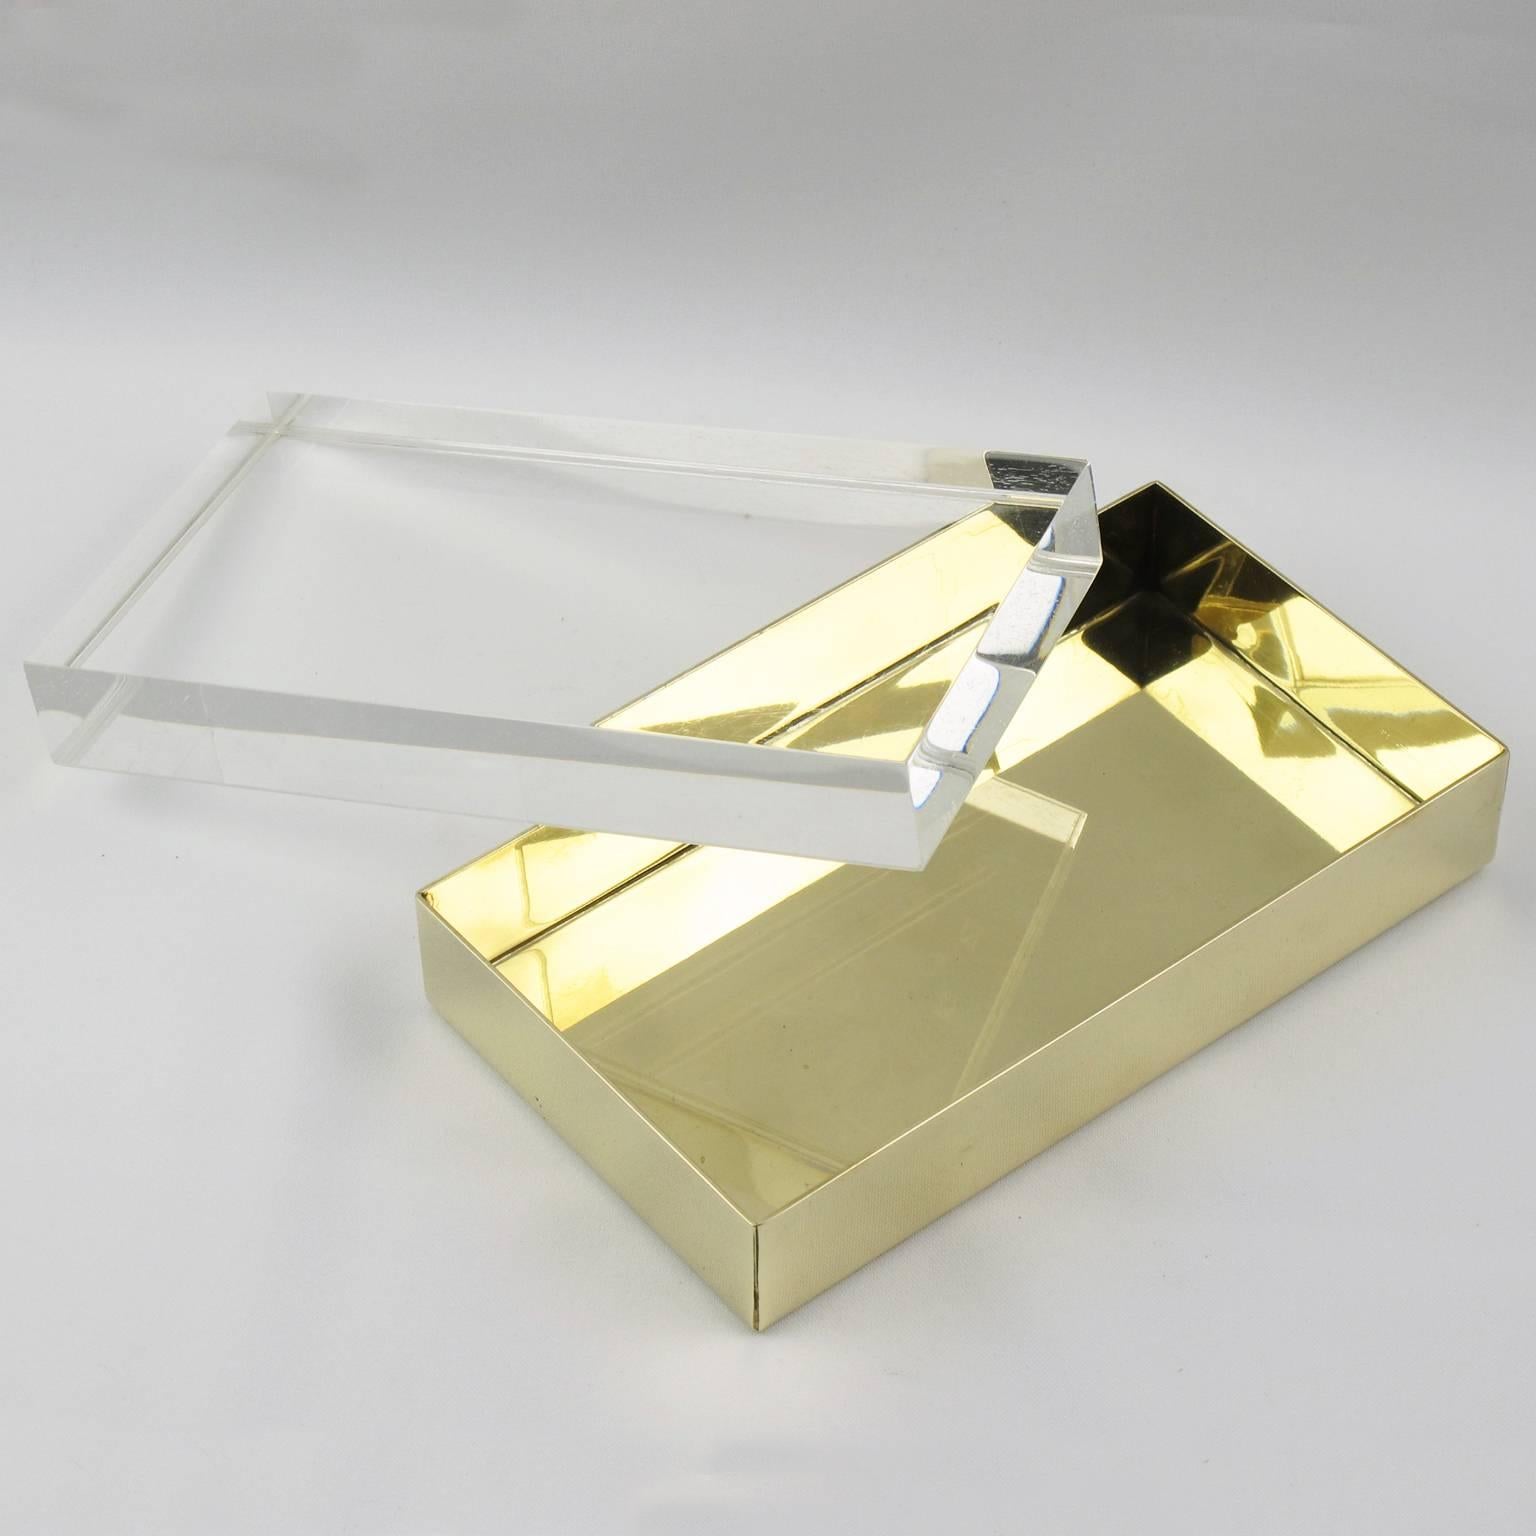 Elegant vintage Mid-Century modernist decorative box in the manner of Gabriella Crespi, Italy, circa 1960s. Minimalist geometric shape with gilded brass and thick crystal clear Lucite lid. Excellent vintage condition.

Measurements: 7.07 in. wide